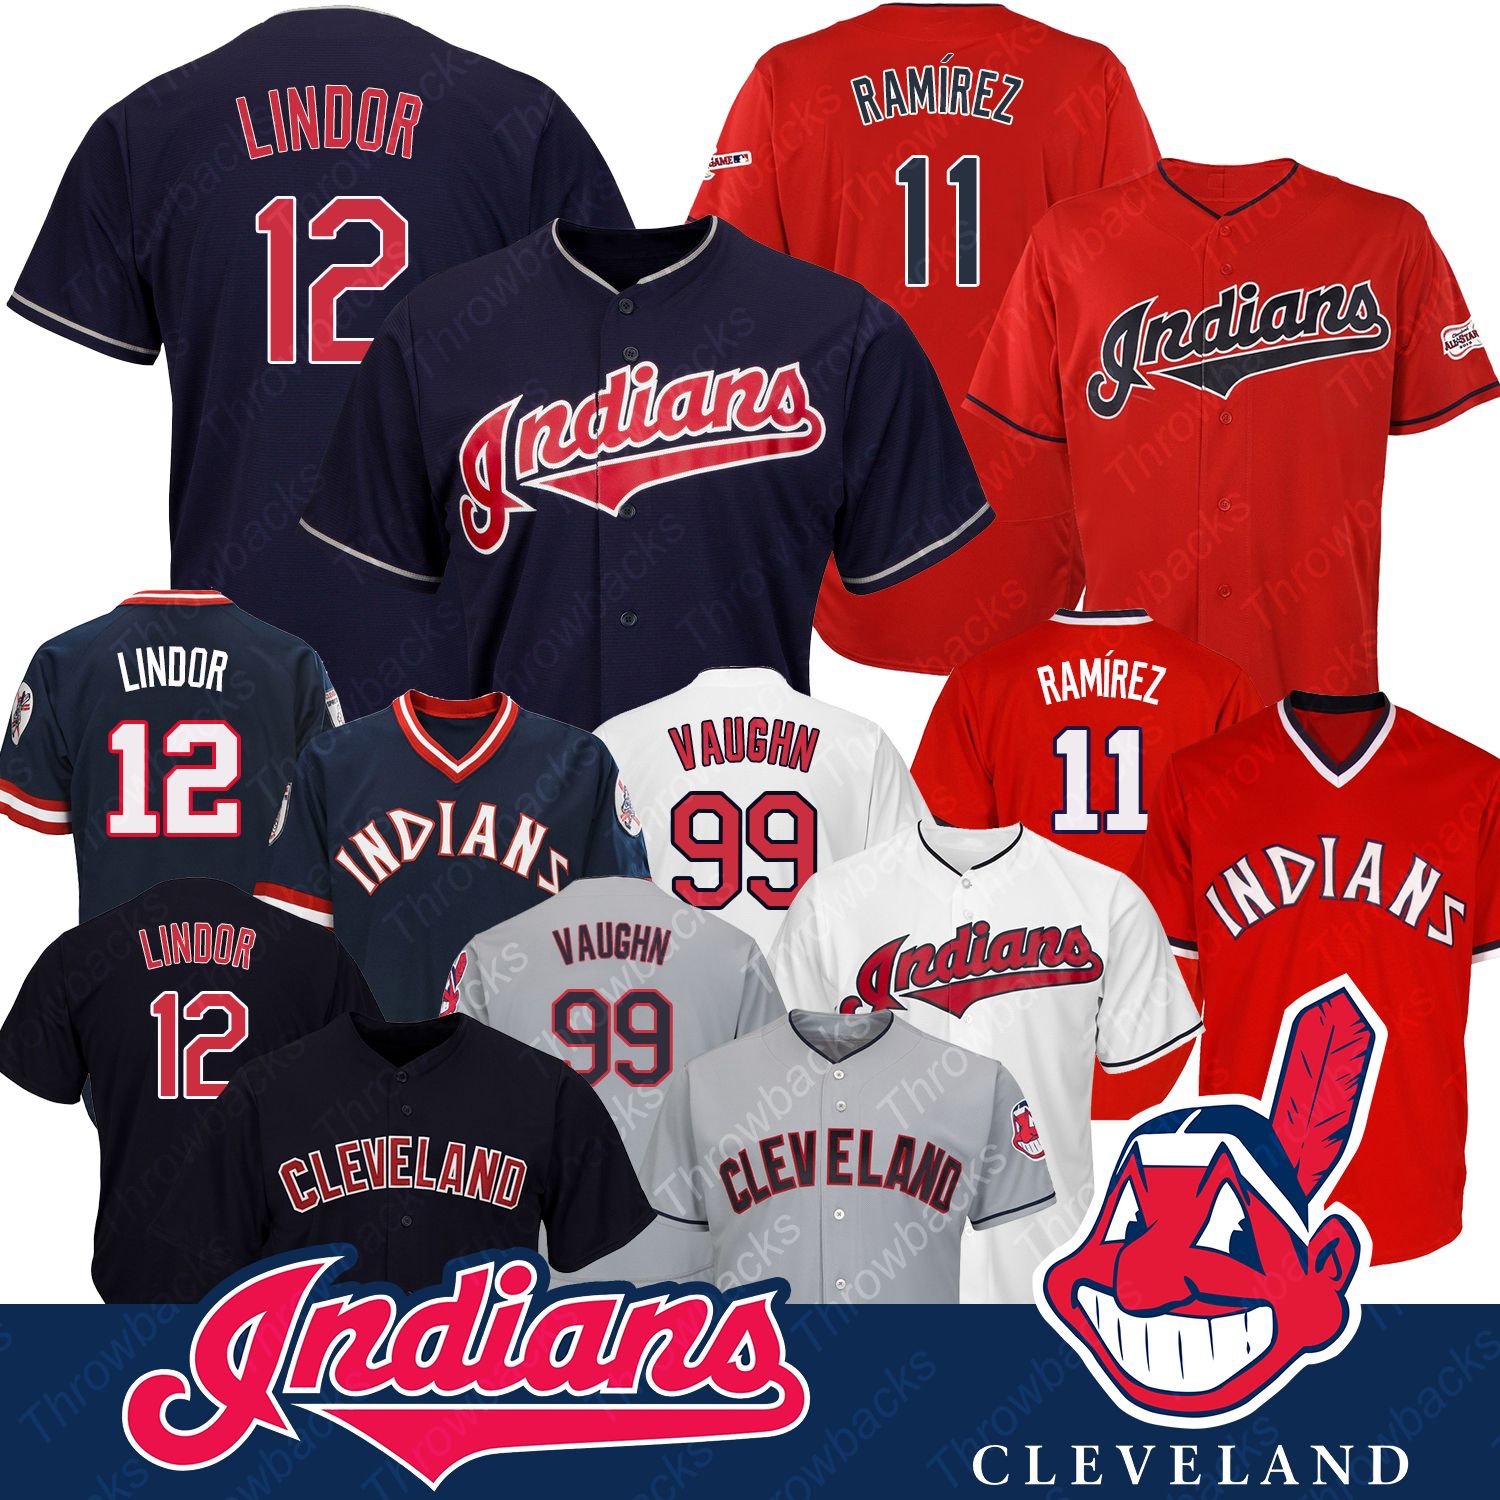 cleveland indians jersey 99